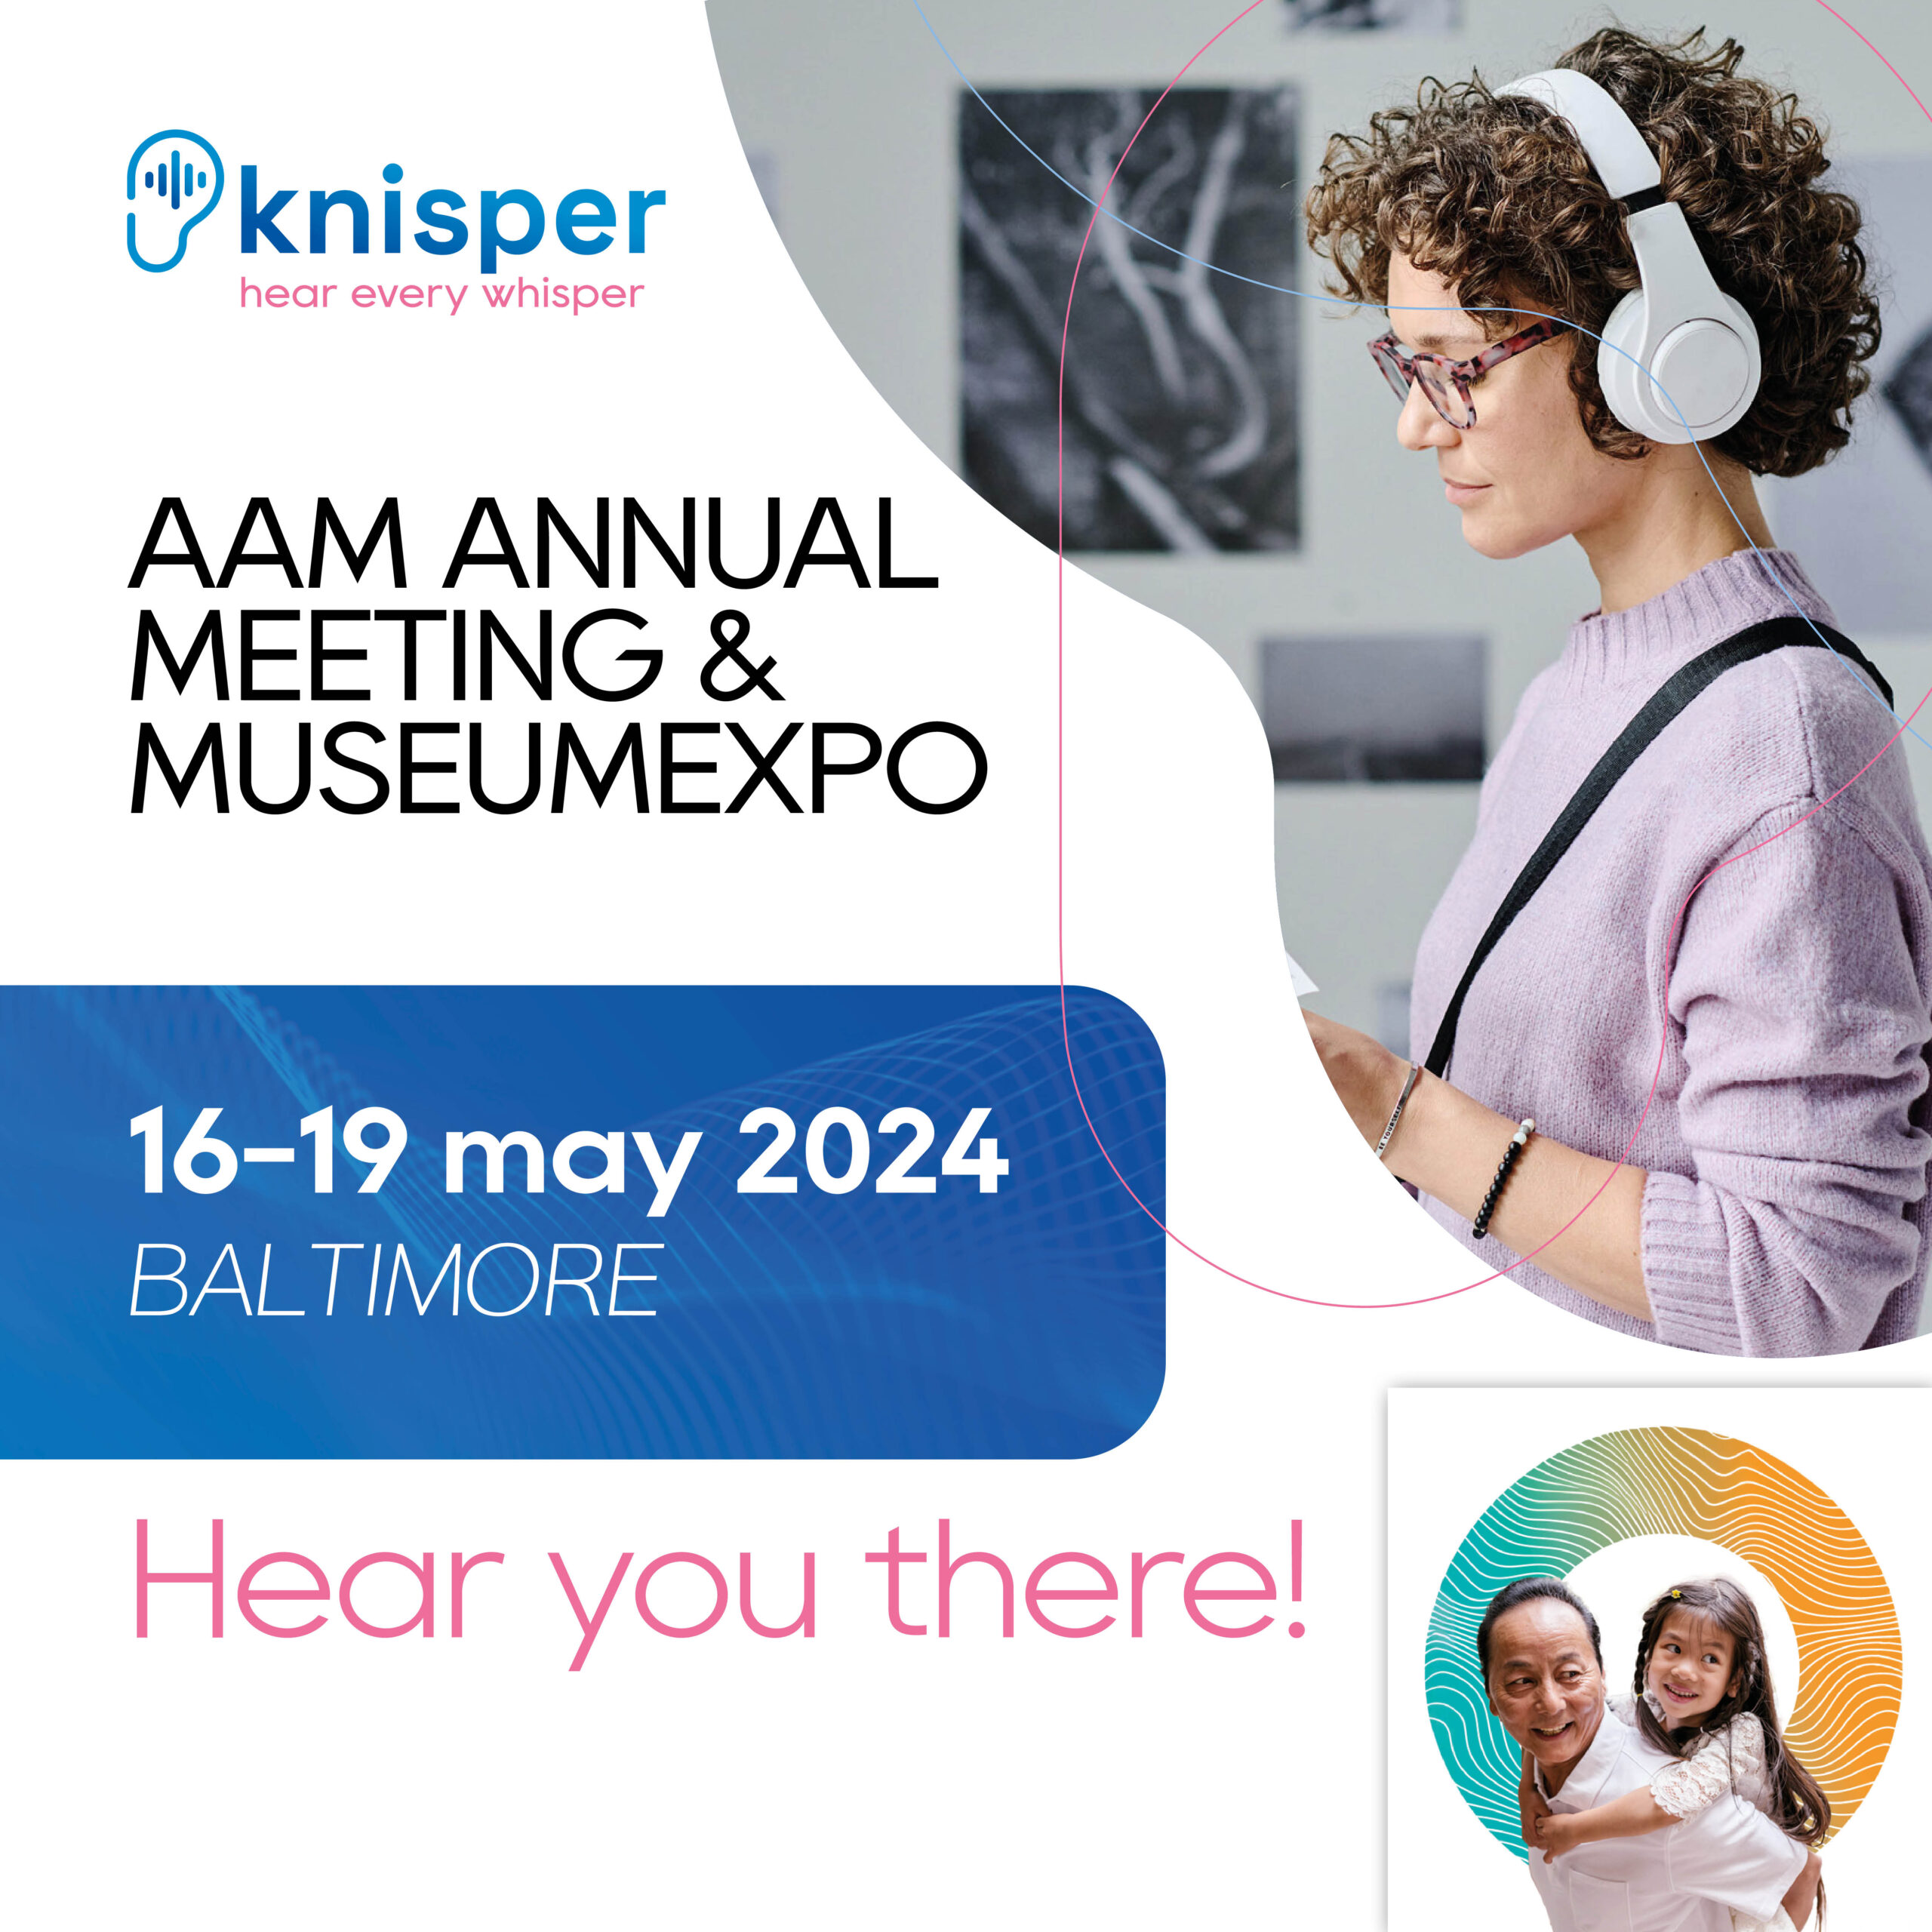 Knisper - AAM ANNUAL MEETING & MUSEUMEXPO post